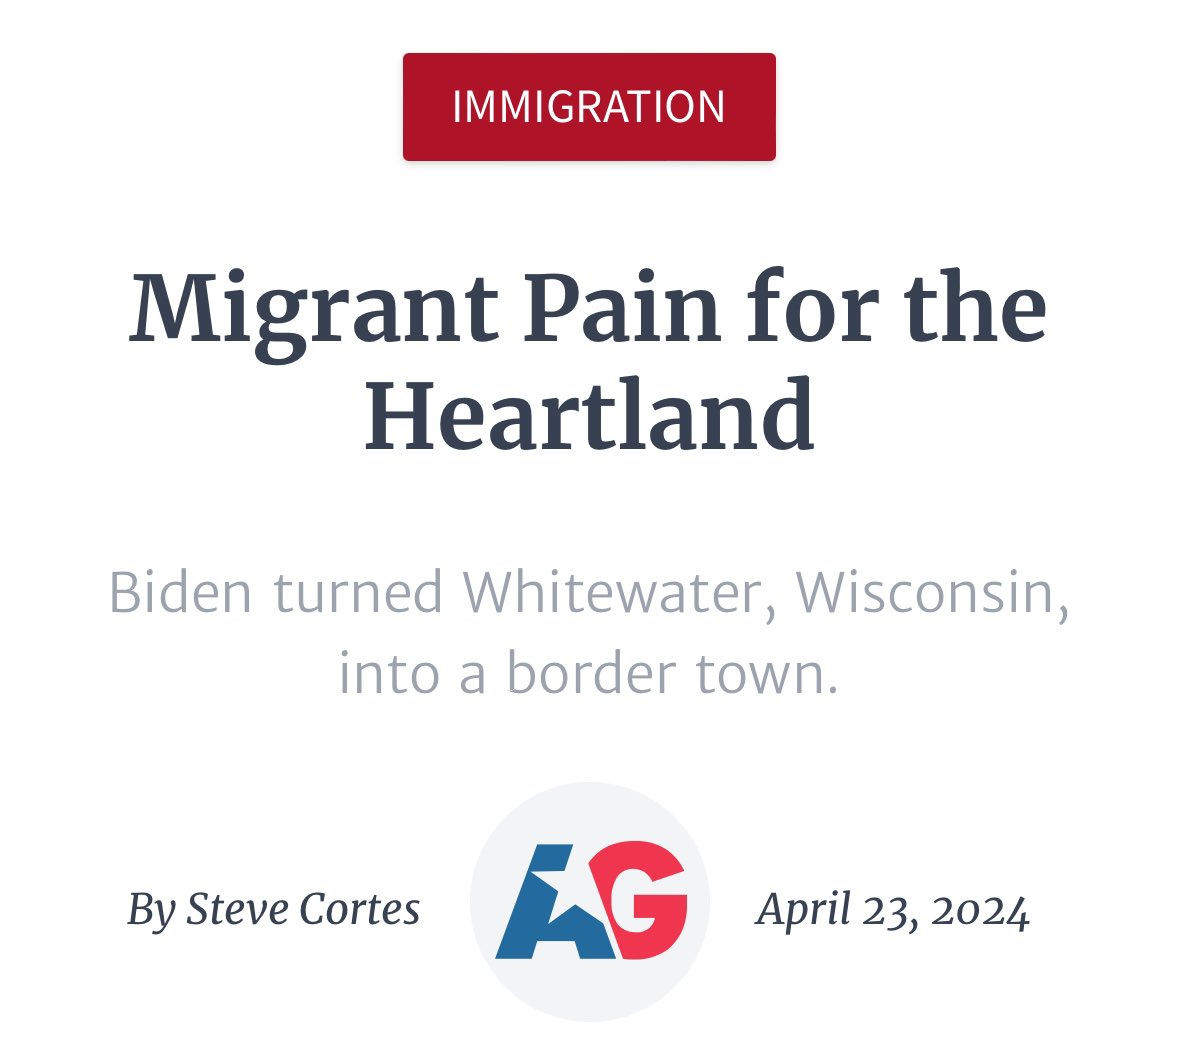 “Will immigration chaos in Wisconsin tip the balance for President Trump? Will quasi-‘border towns’ like Whitewater vote to demand border security? It seems likely.” - LAW Founder @CortesSteve amgreatness.com/2024/04/23/mig…